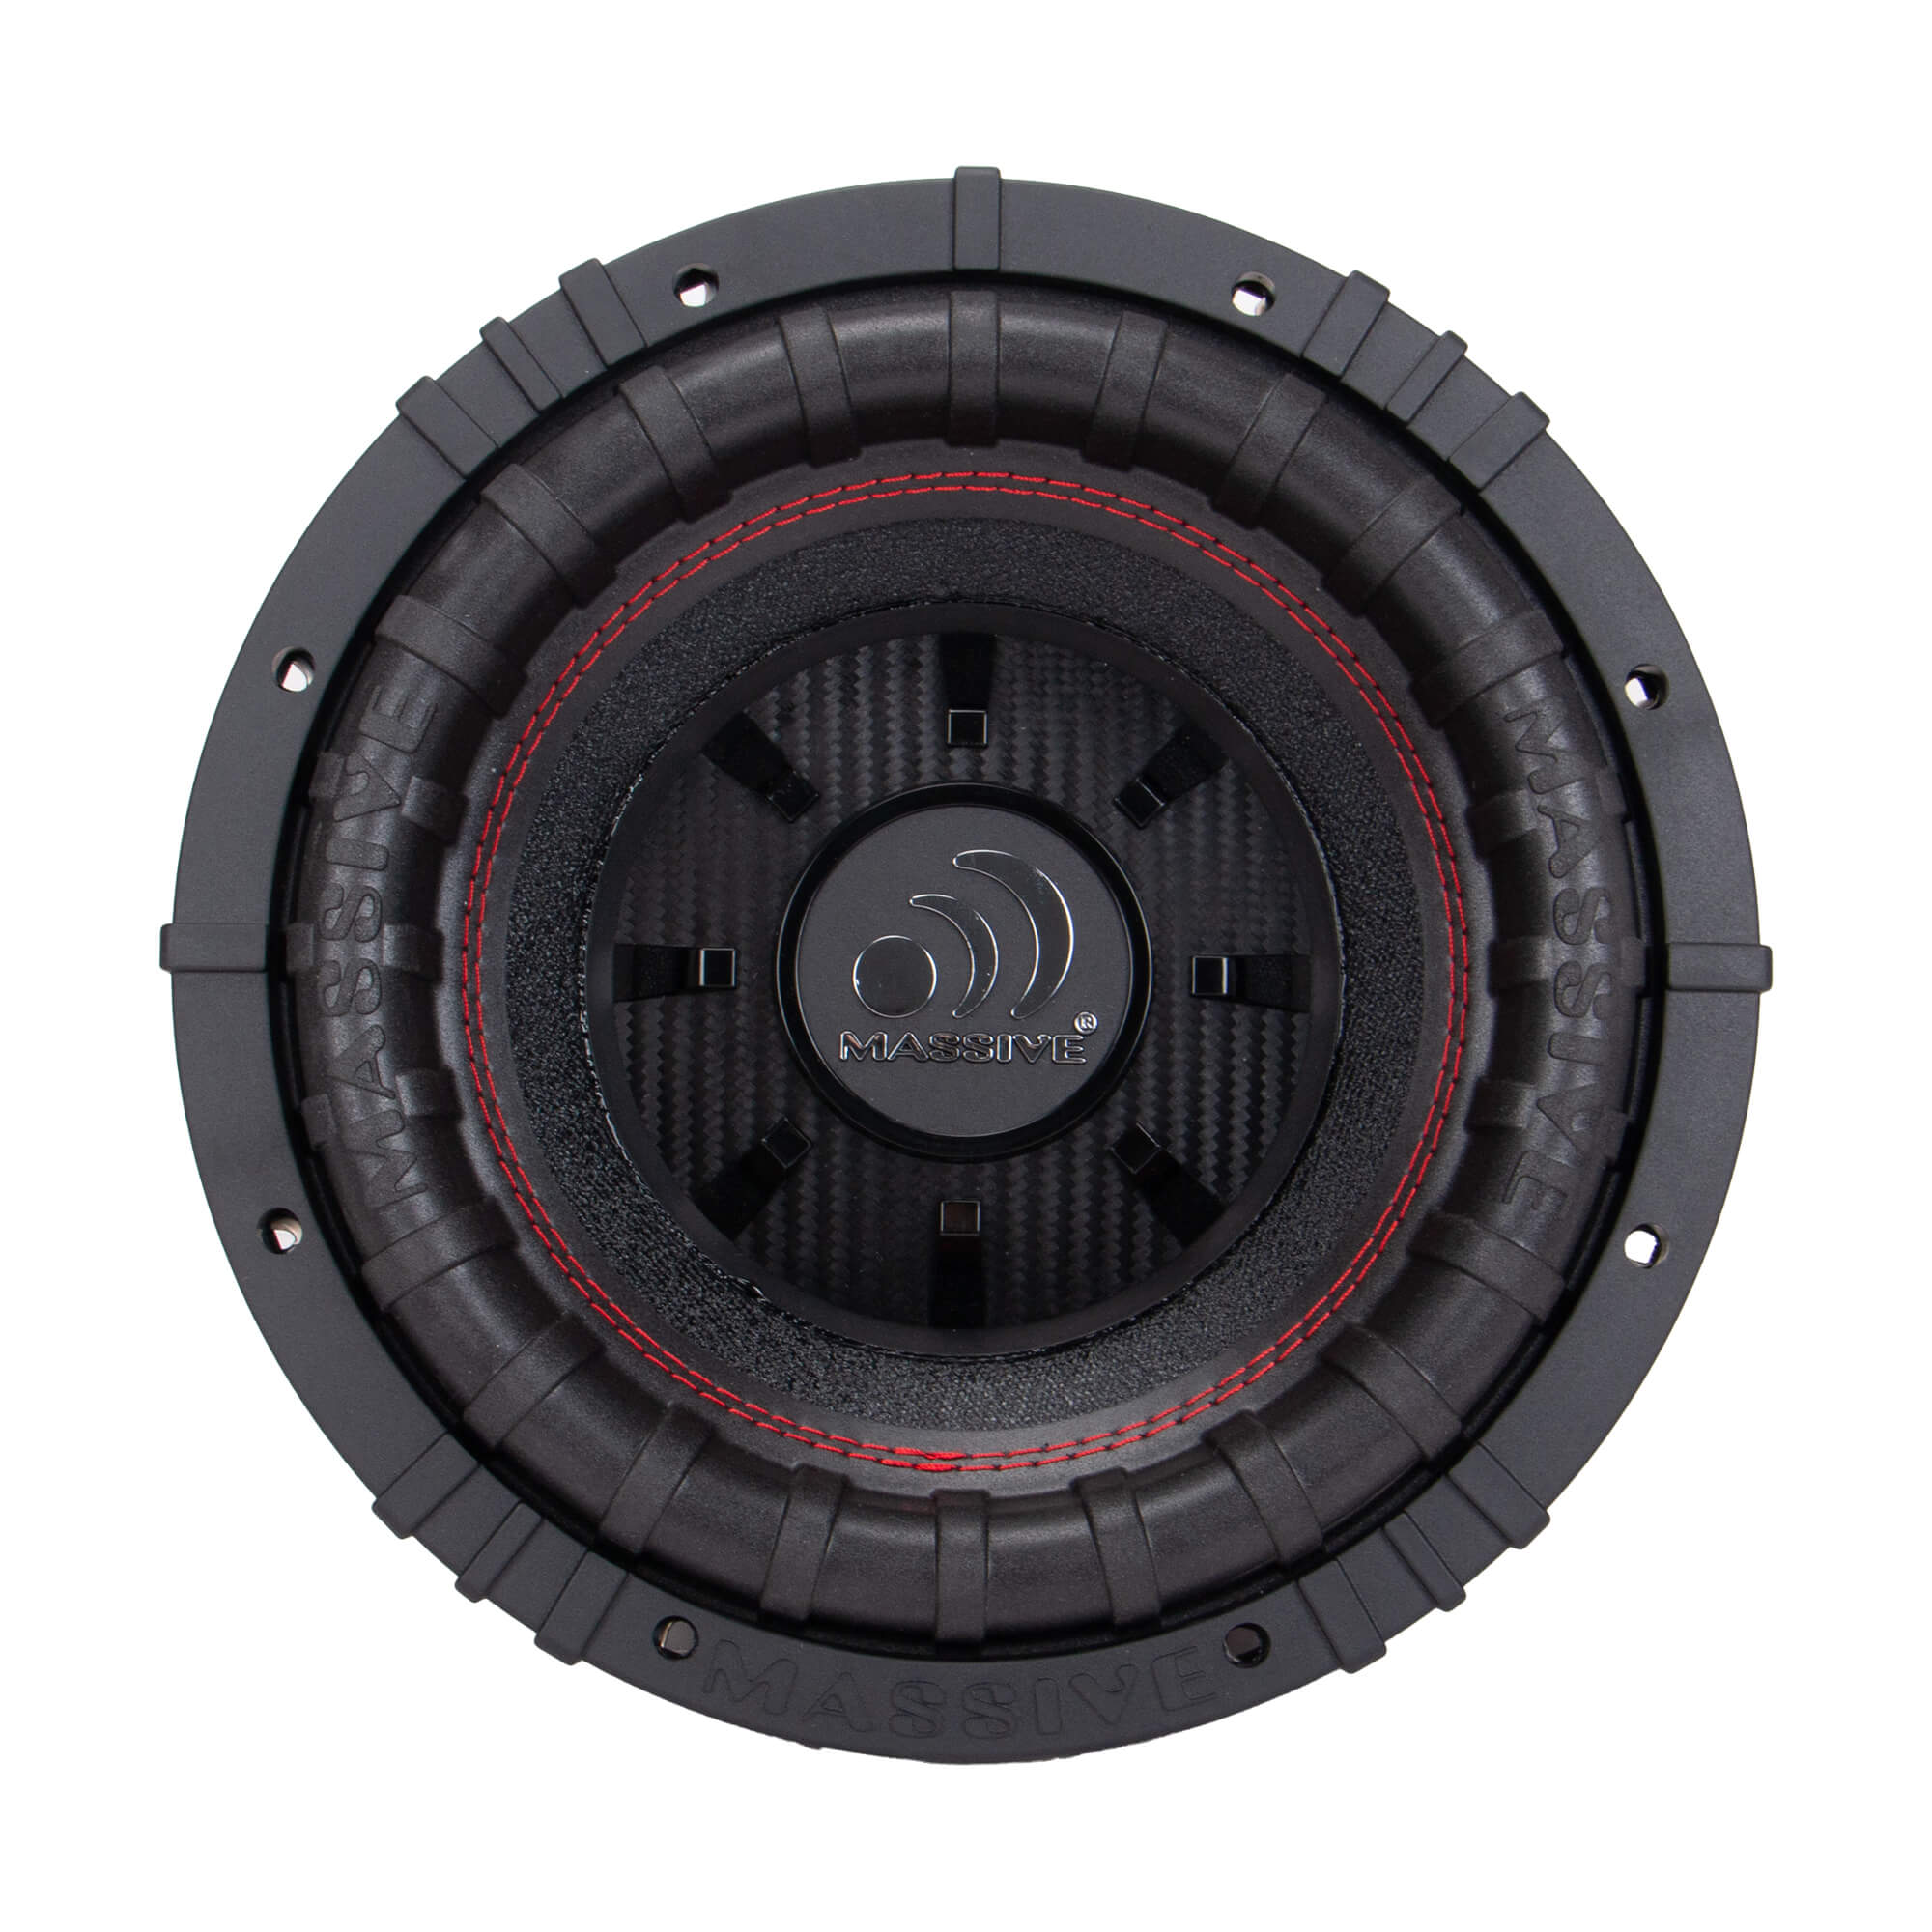 GTR102 - 10" 1000 Watts RMS Dual 2 Ohm Subwoofer